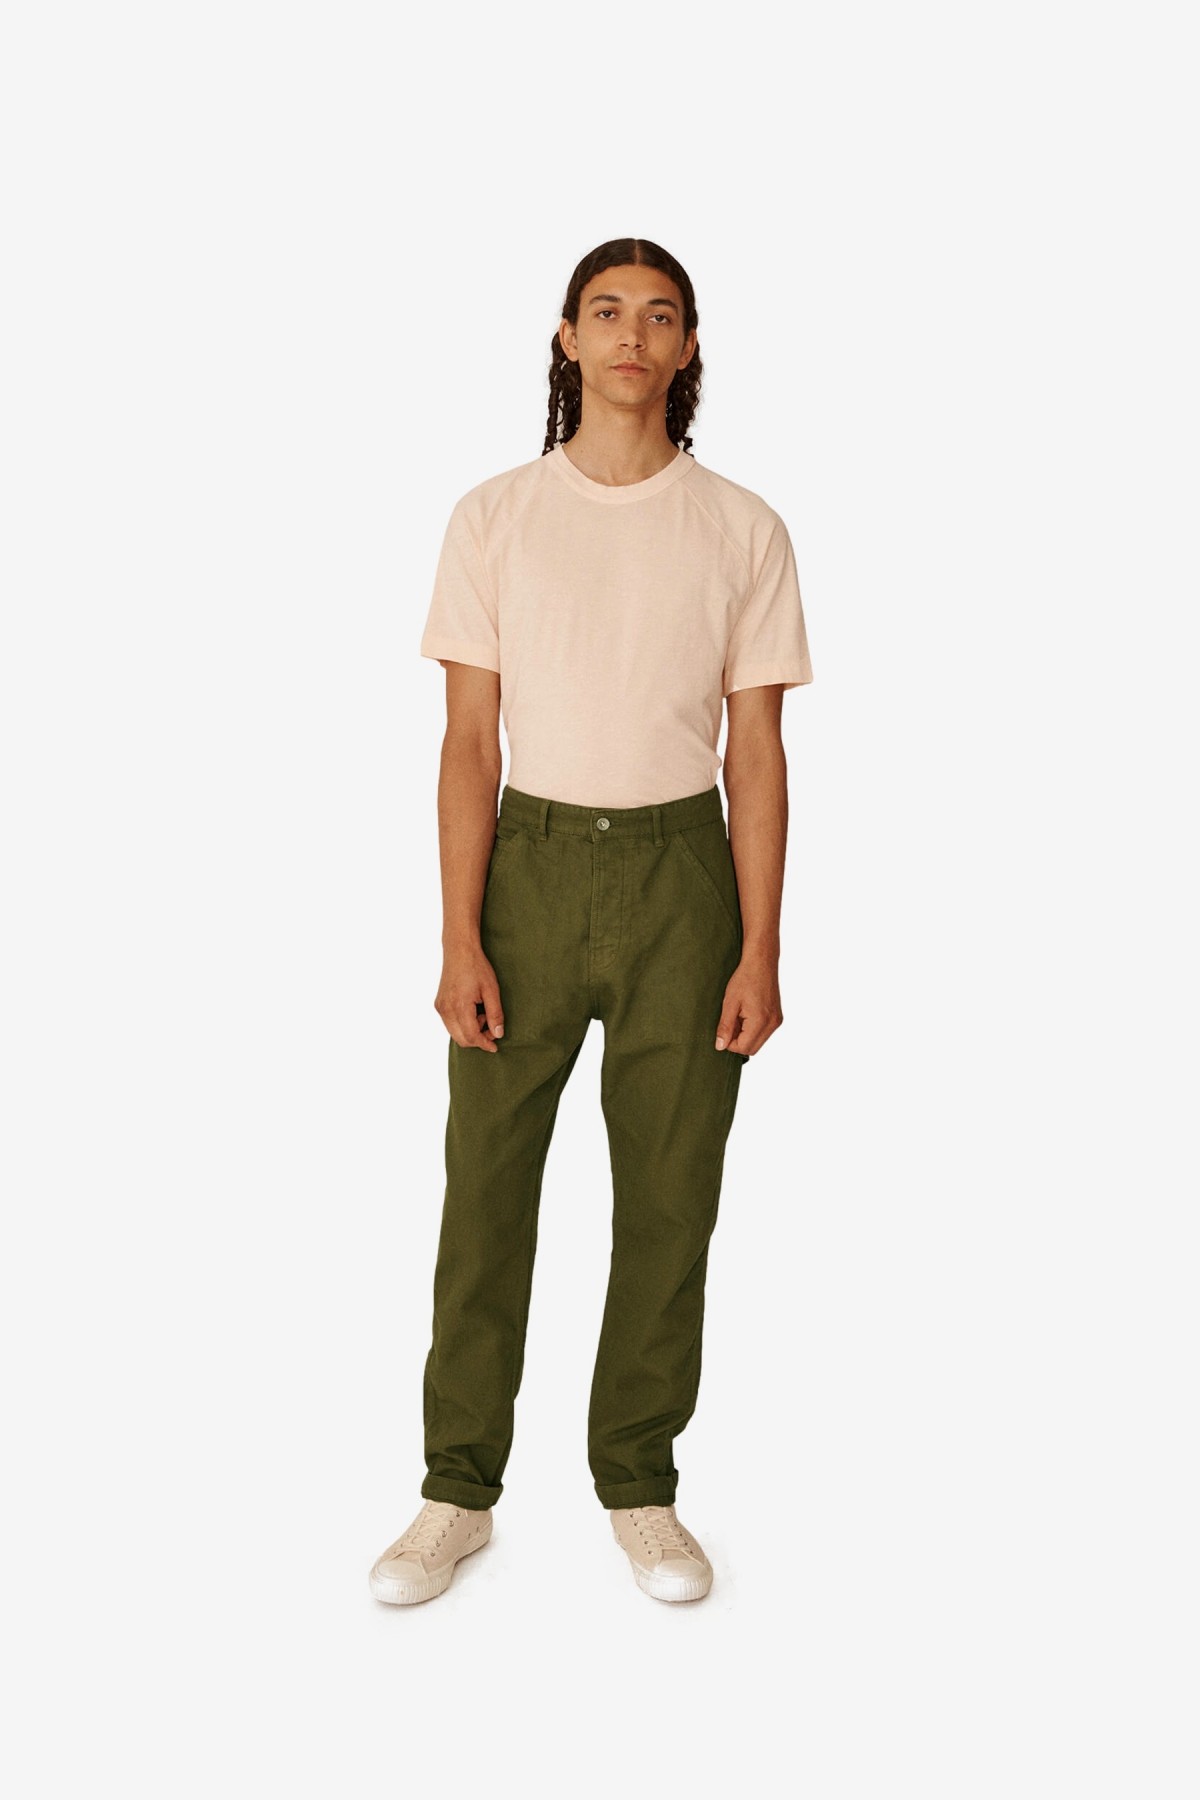 YMC You Must Create Painter Trouser in Olive